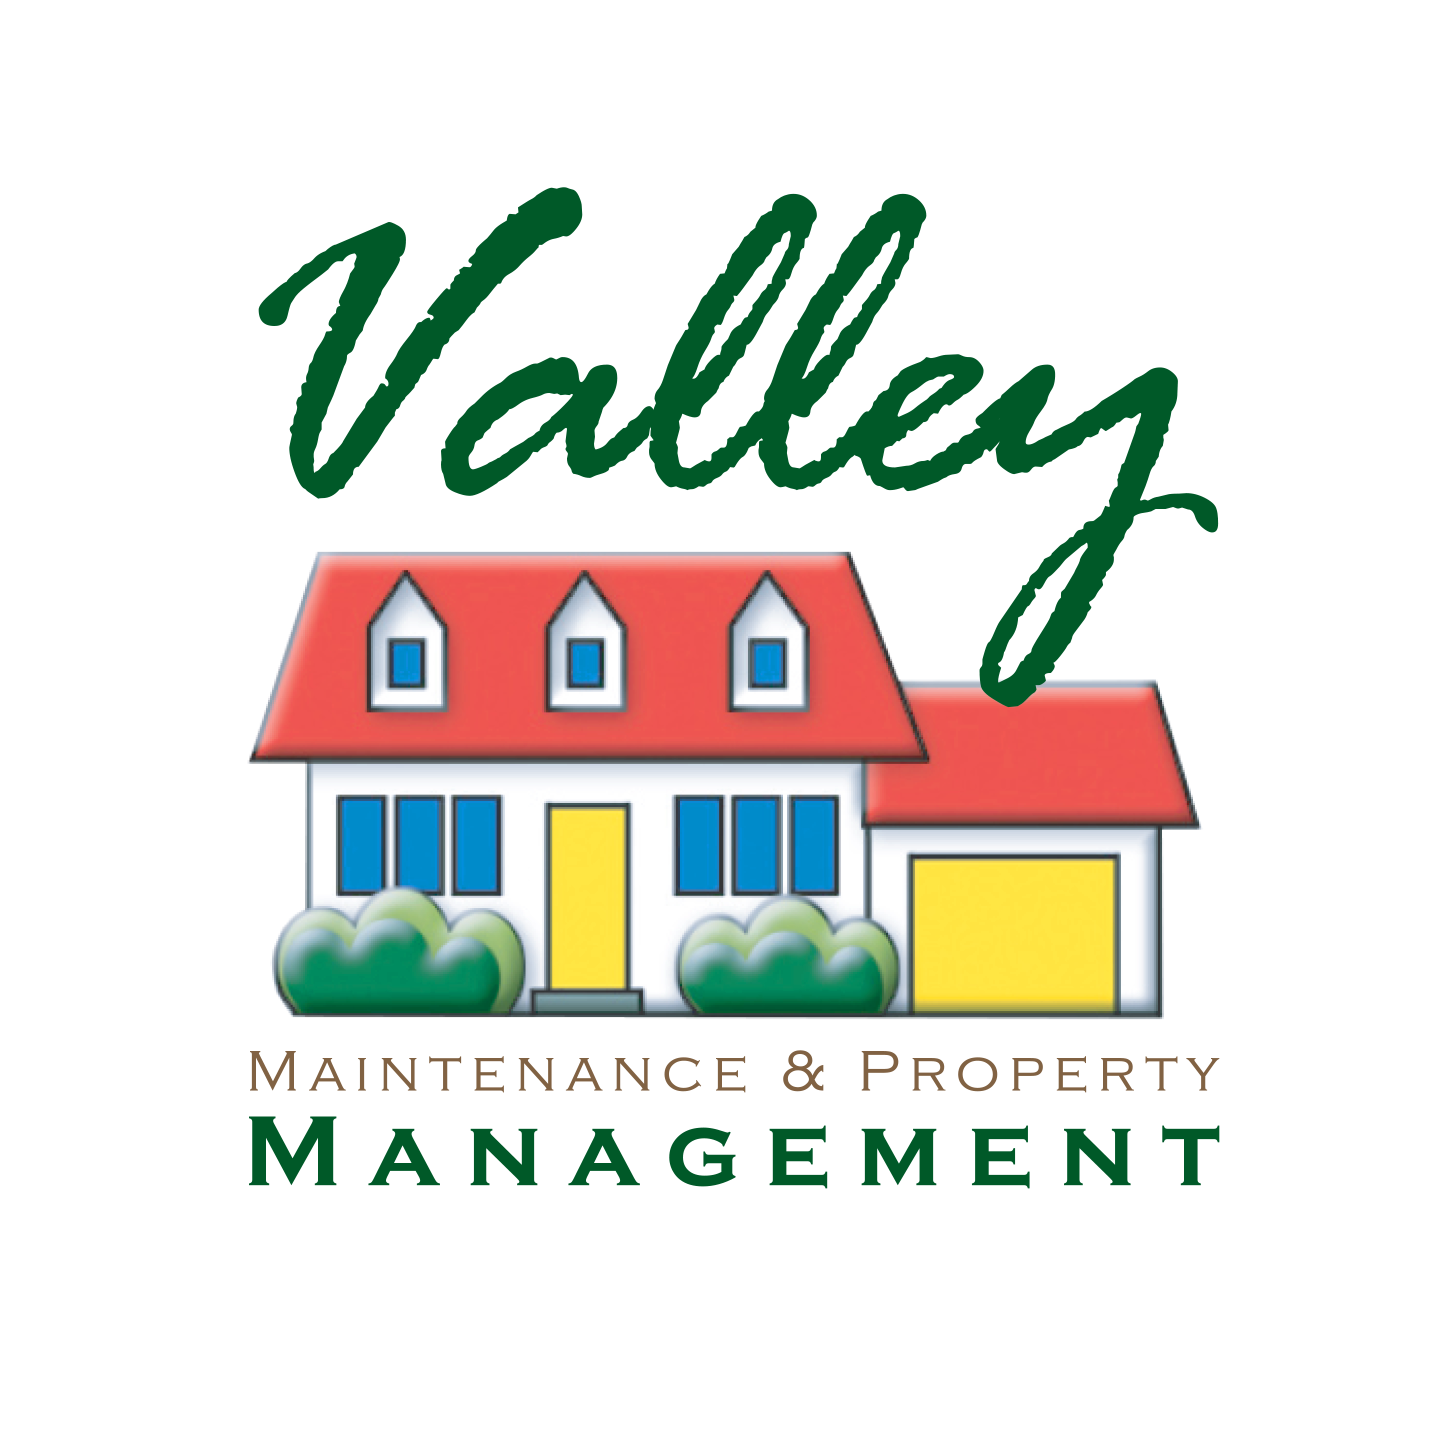 Business logo of Valley Maintenance & Property Management